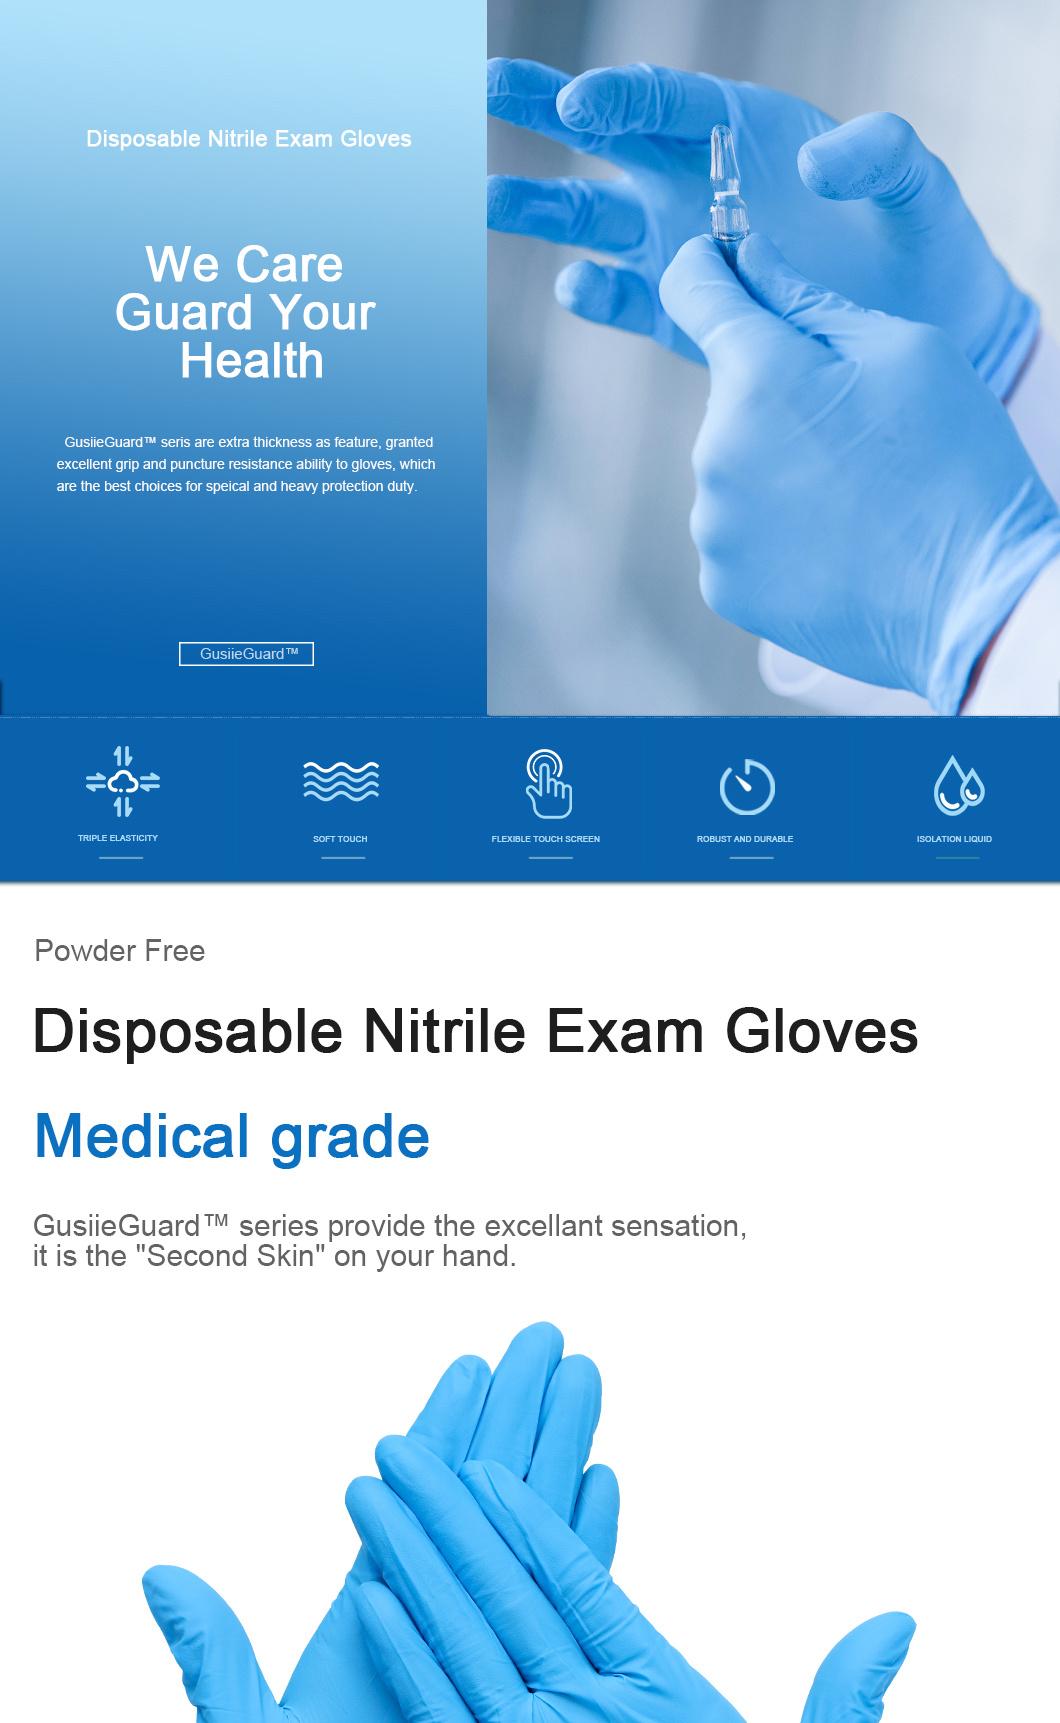 Disposable Safety Medical Exam Blue/Blacknitrile Gloves Without Powder Wholesale Factory Nitrile Large Gloves